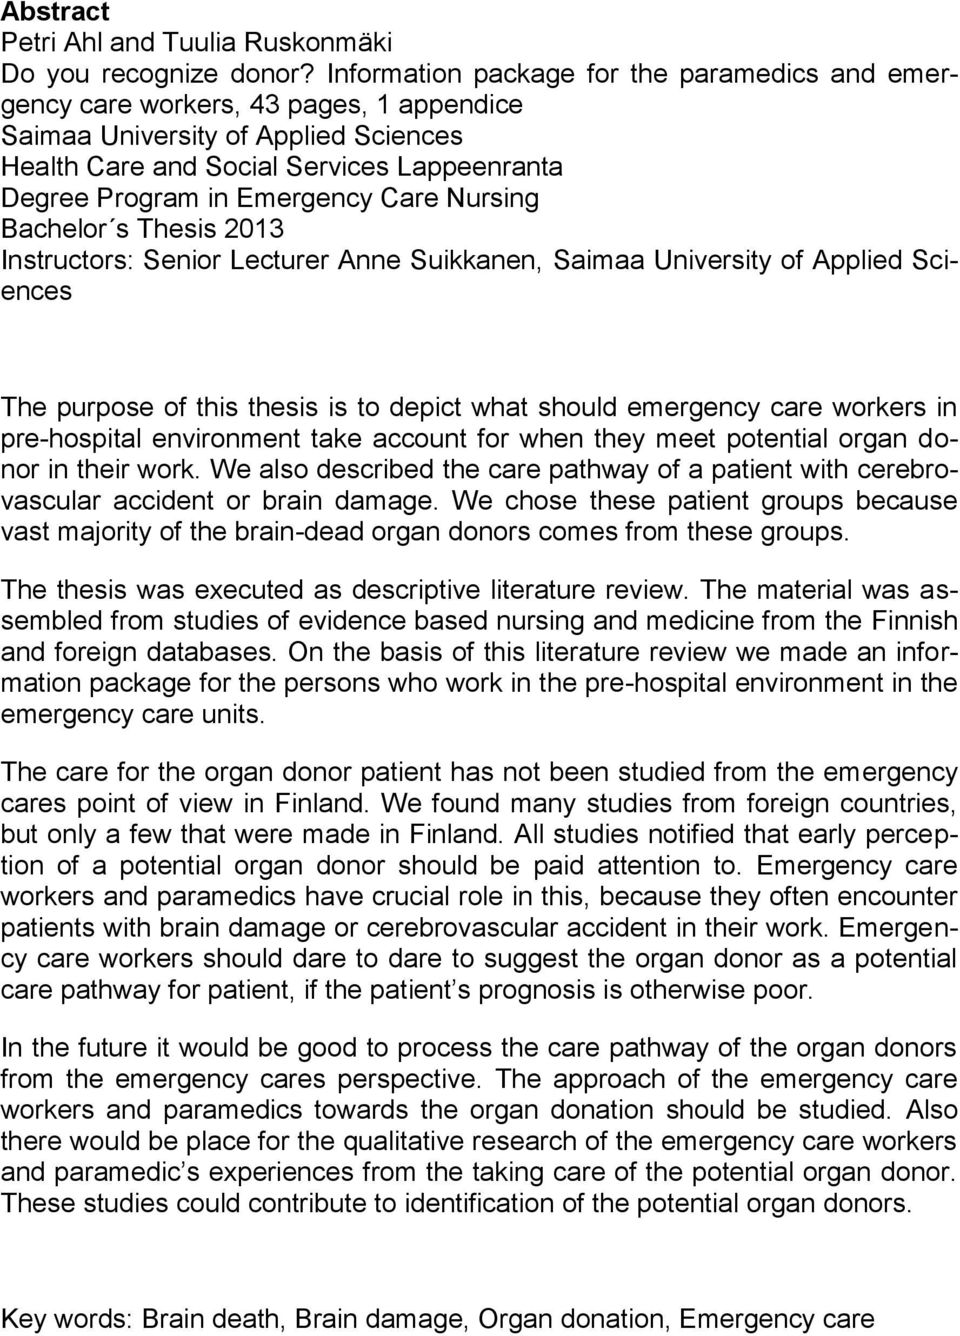 Care Nursing Bachelor s Thesis 2013 Instructors: Senior Lecturer Anne Suikkanen, Saimaa University of Applied Sciences The purpose of this thesis is to depict what should emergency care workers in